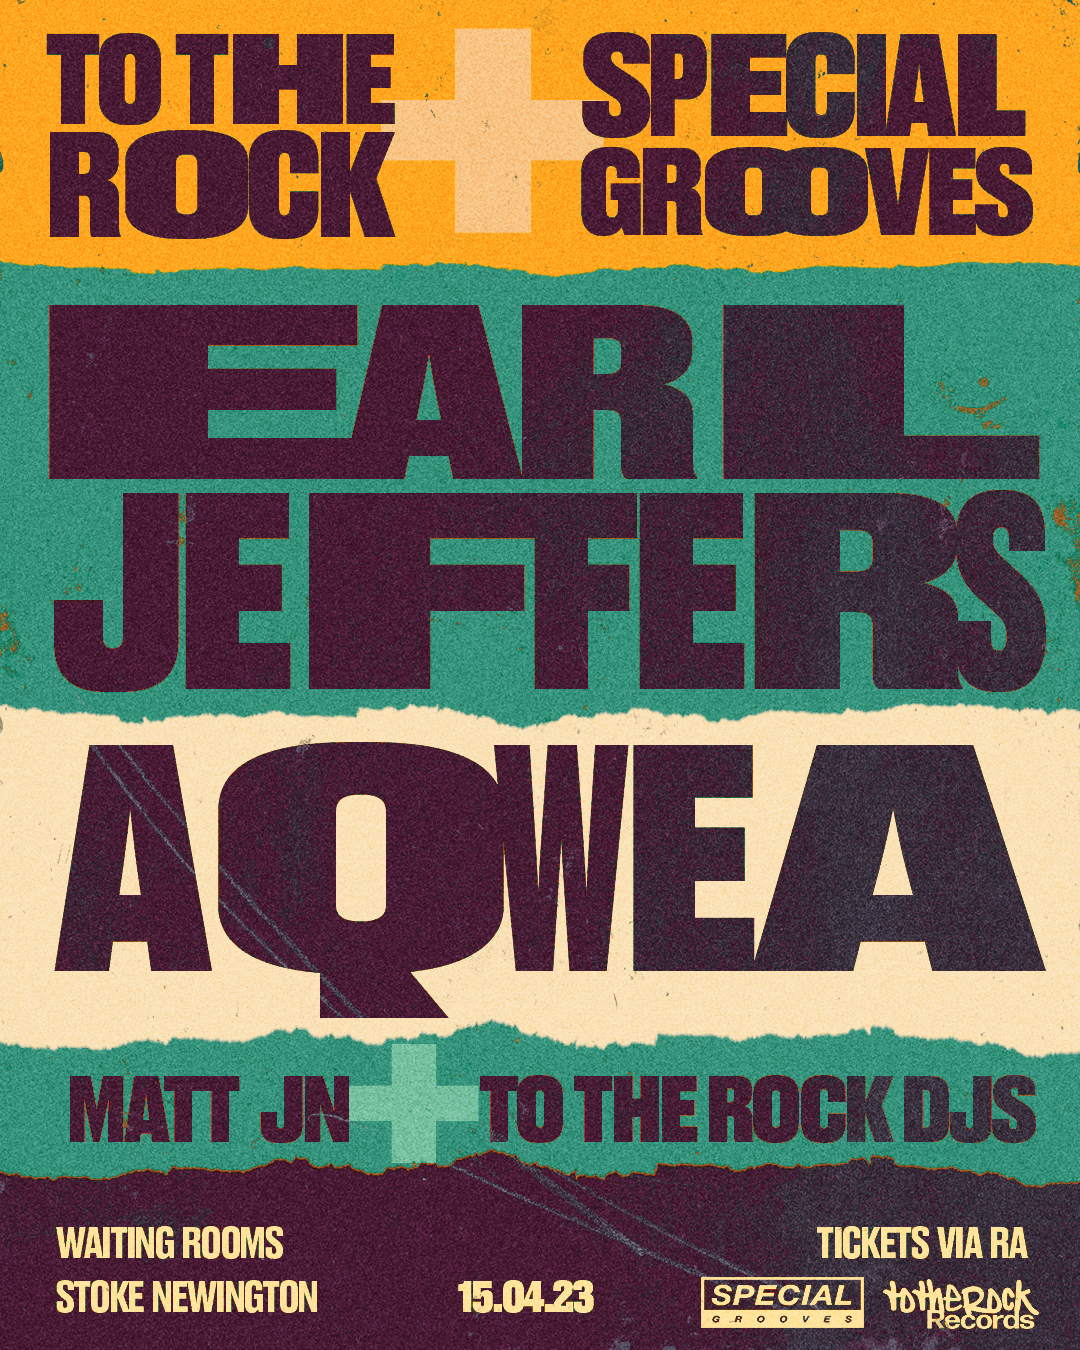 totheRockRecords x Special Grooves: Earl Jeffers, Aqwea - Página frontal